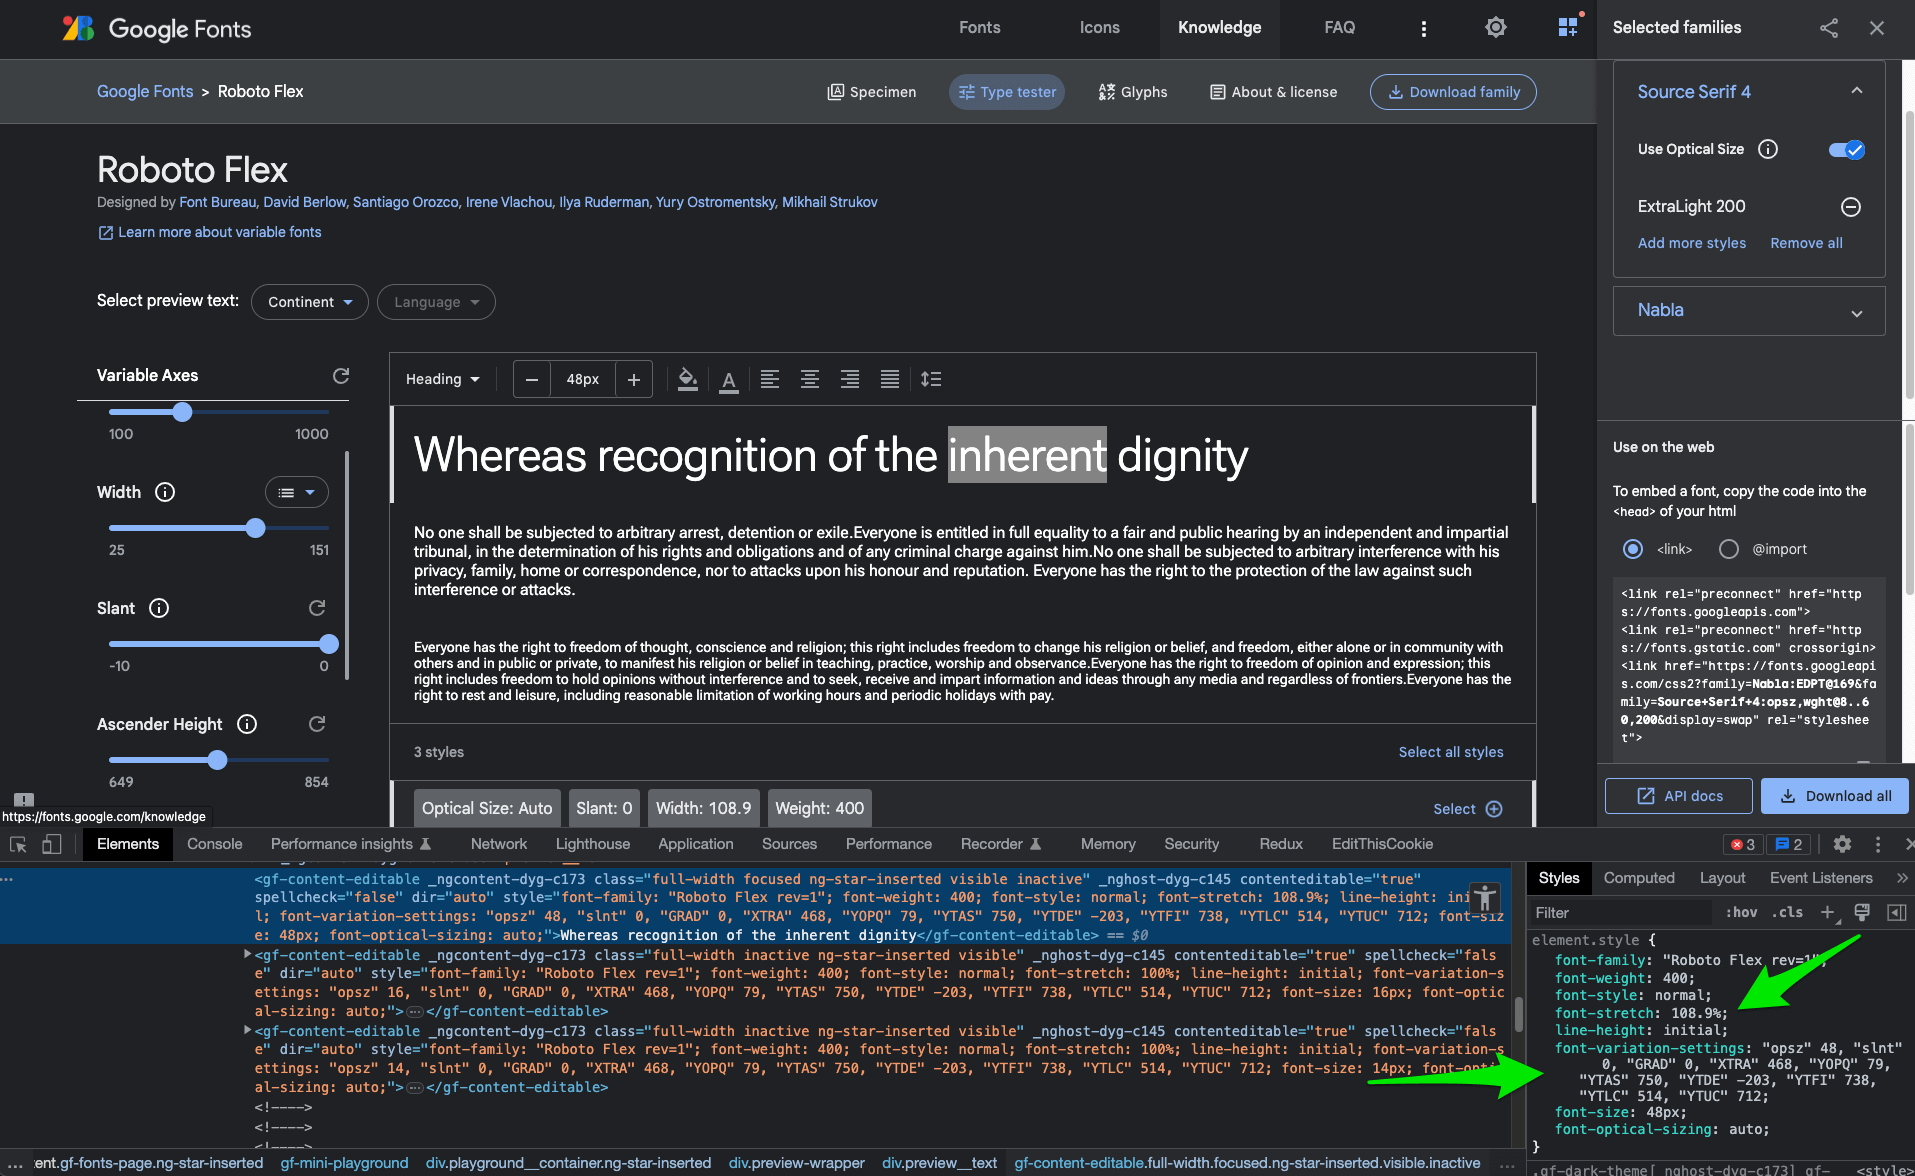 Using Dev Tools to inspect the Google Fonts interface and see what CSS is being applied